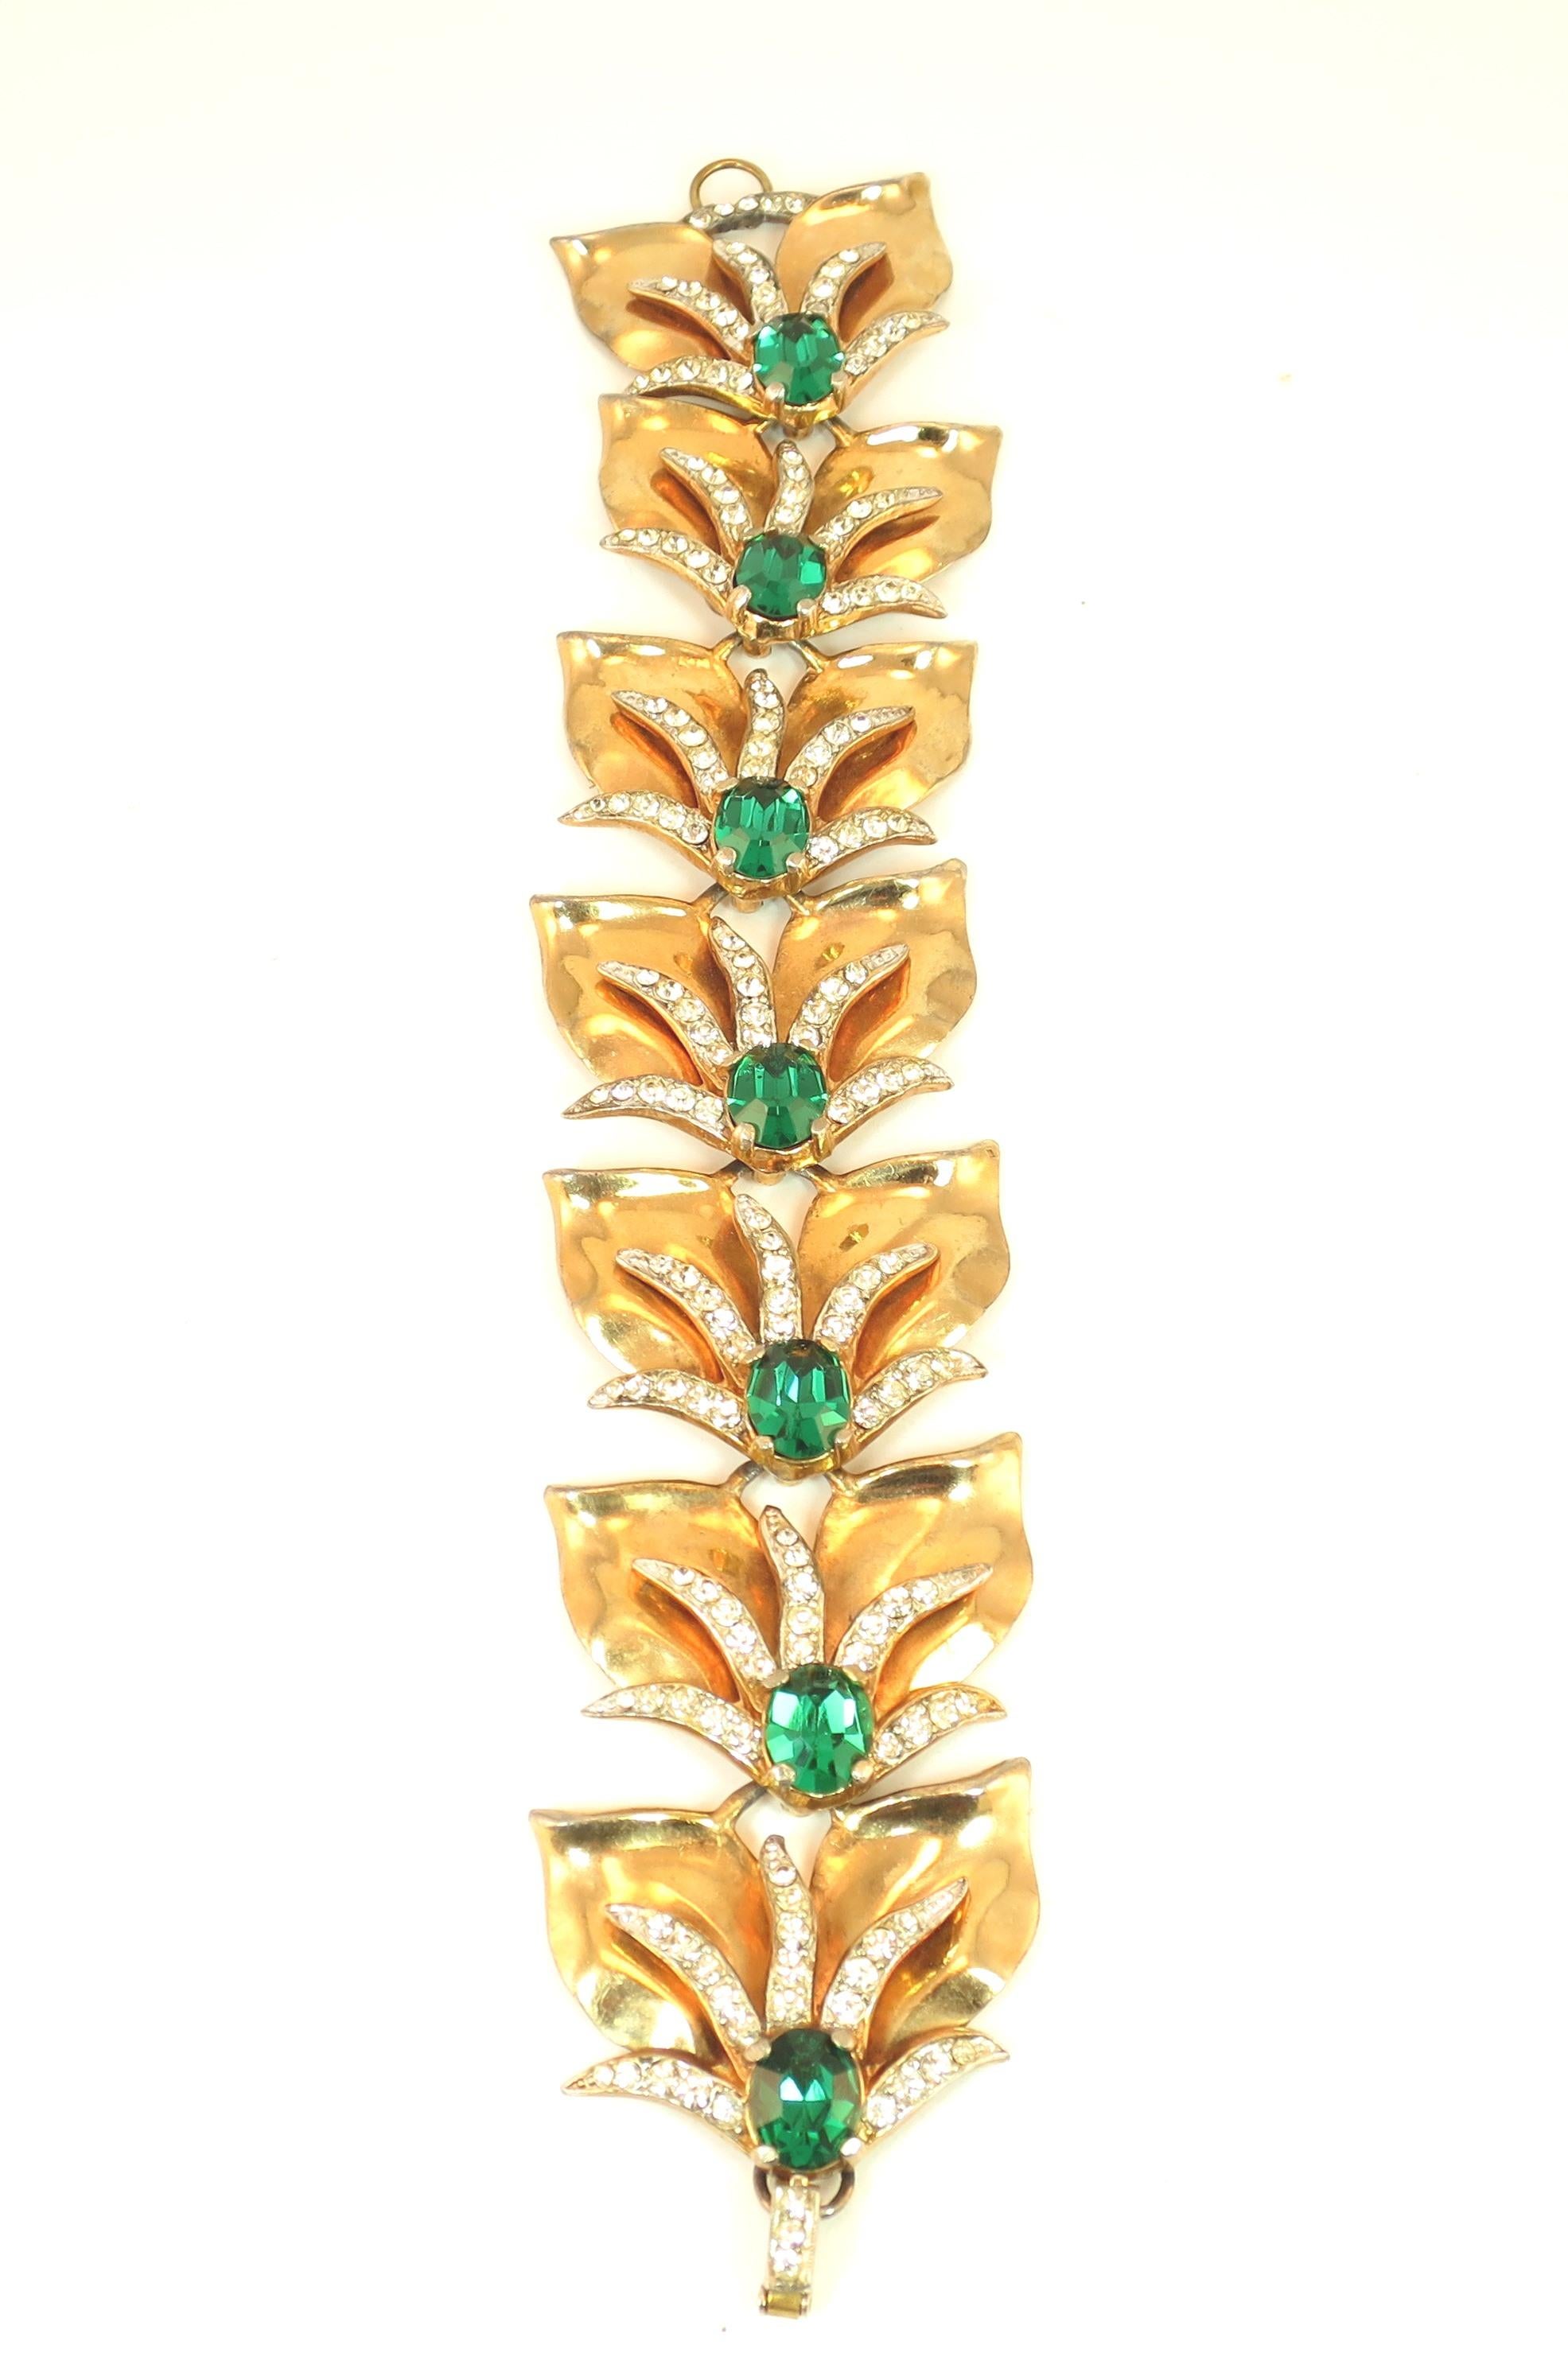 Modernist Abstract Emerald Crystal Linked Bracelet, 1940s In Good Condition For Sale In Burbank, CA